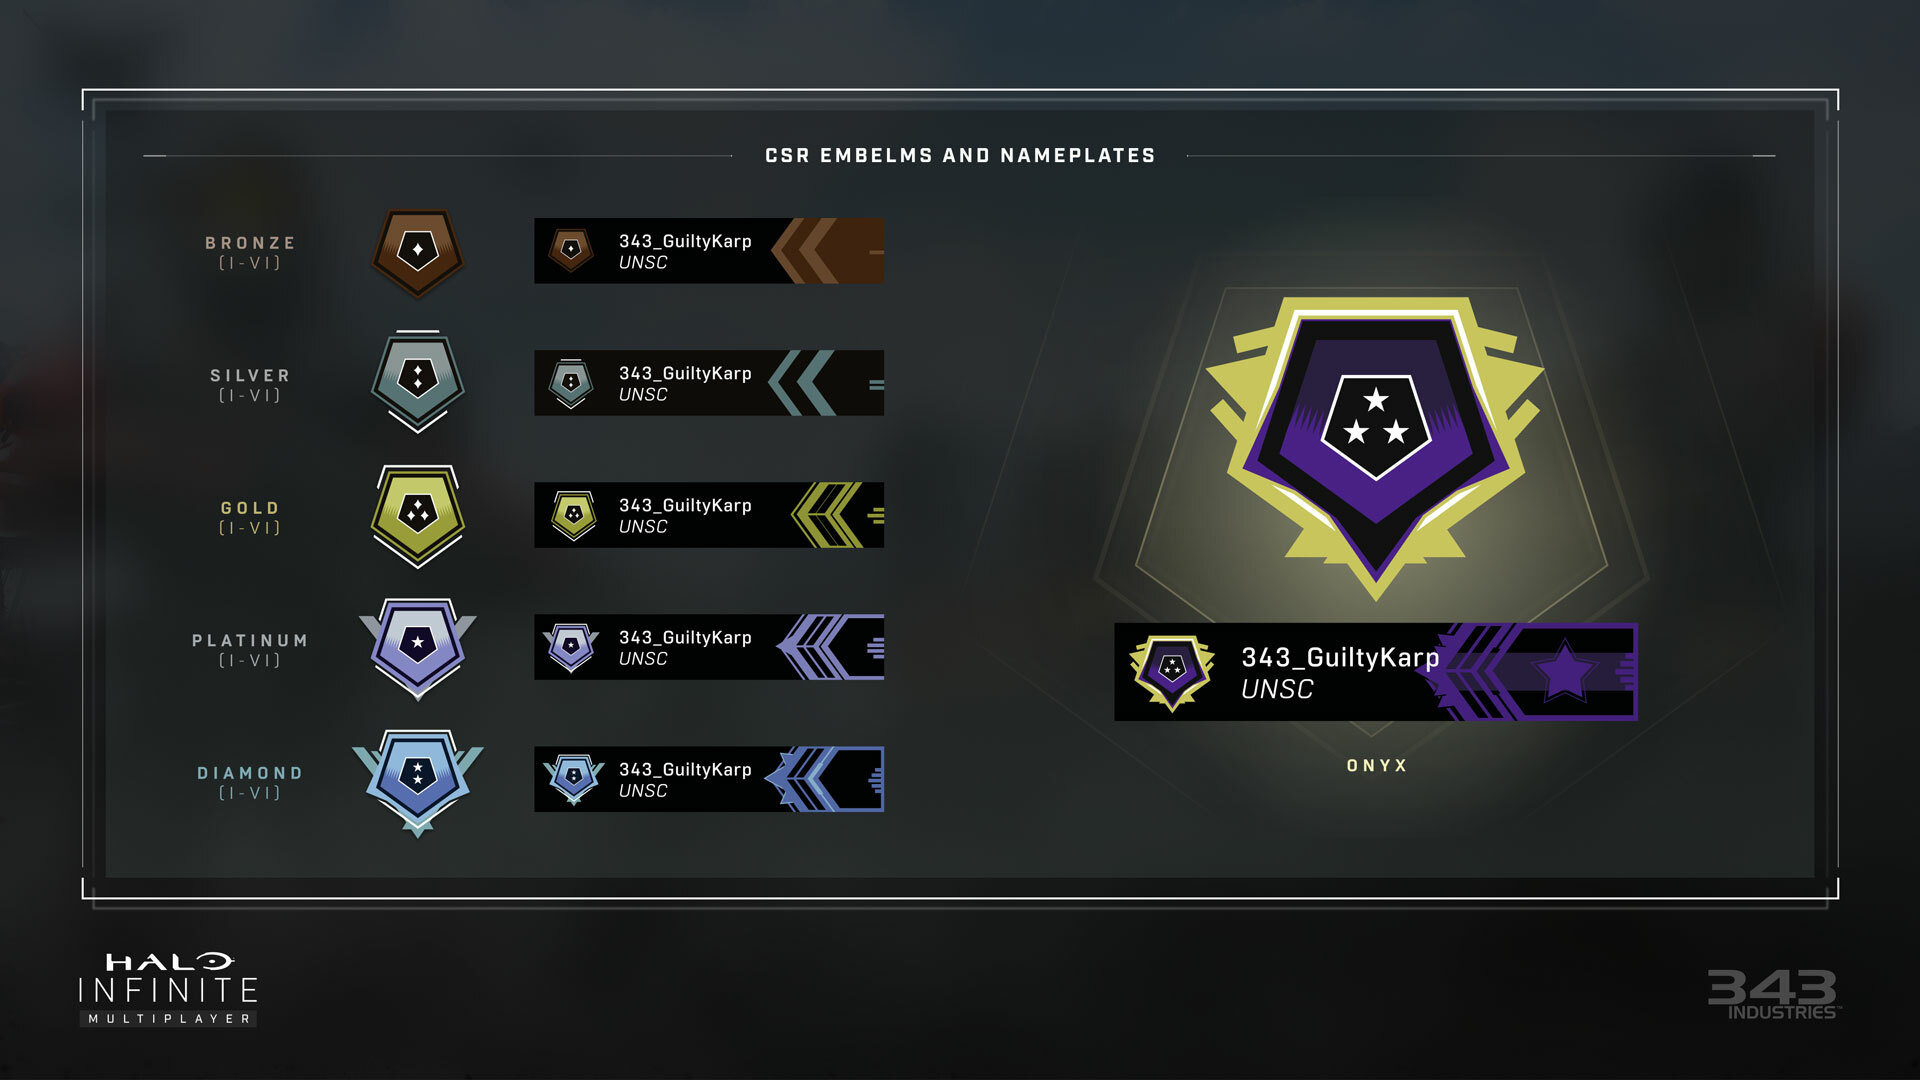 Halo Infinite S1 ranked emblems and nameplates. 